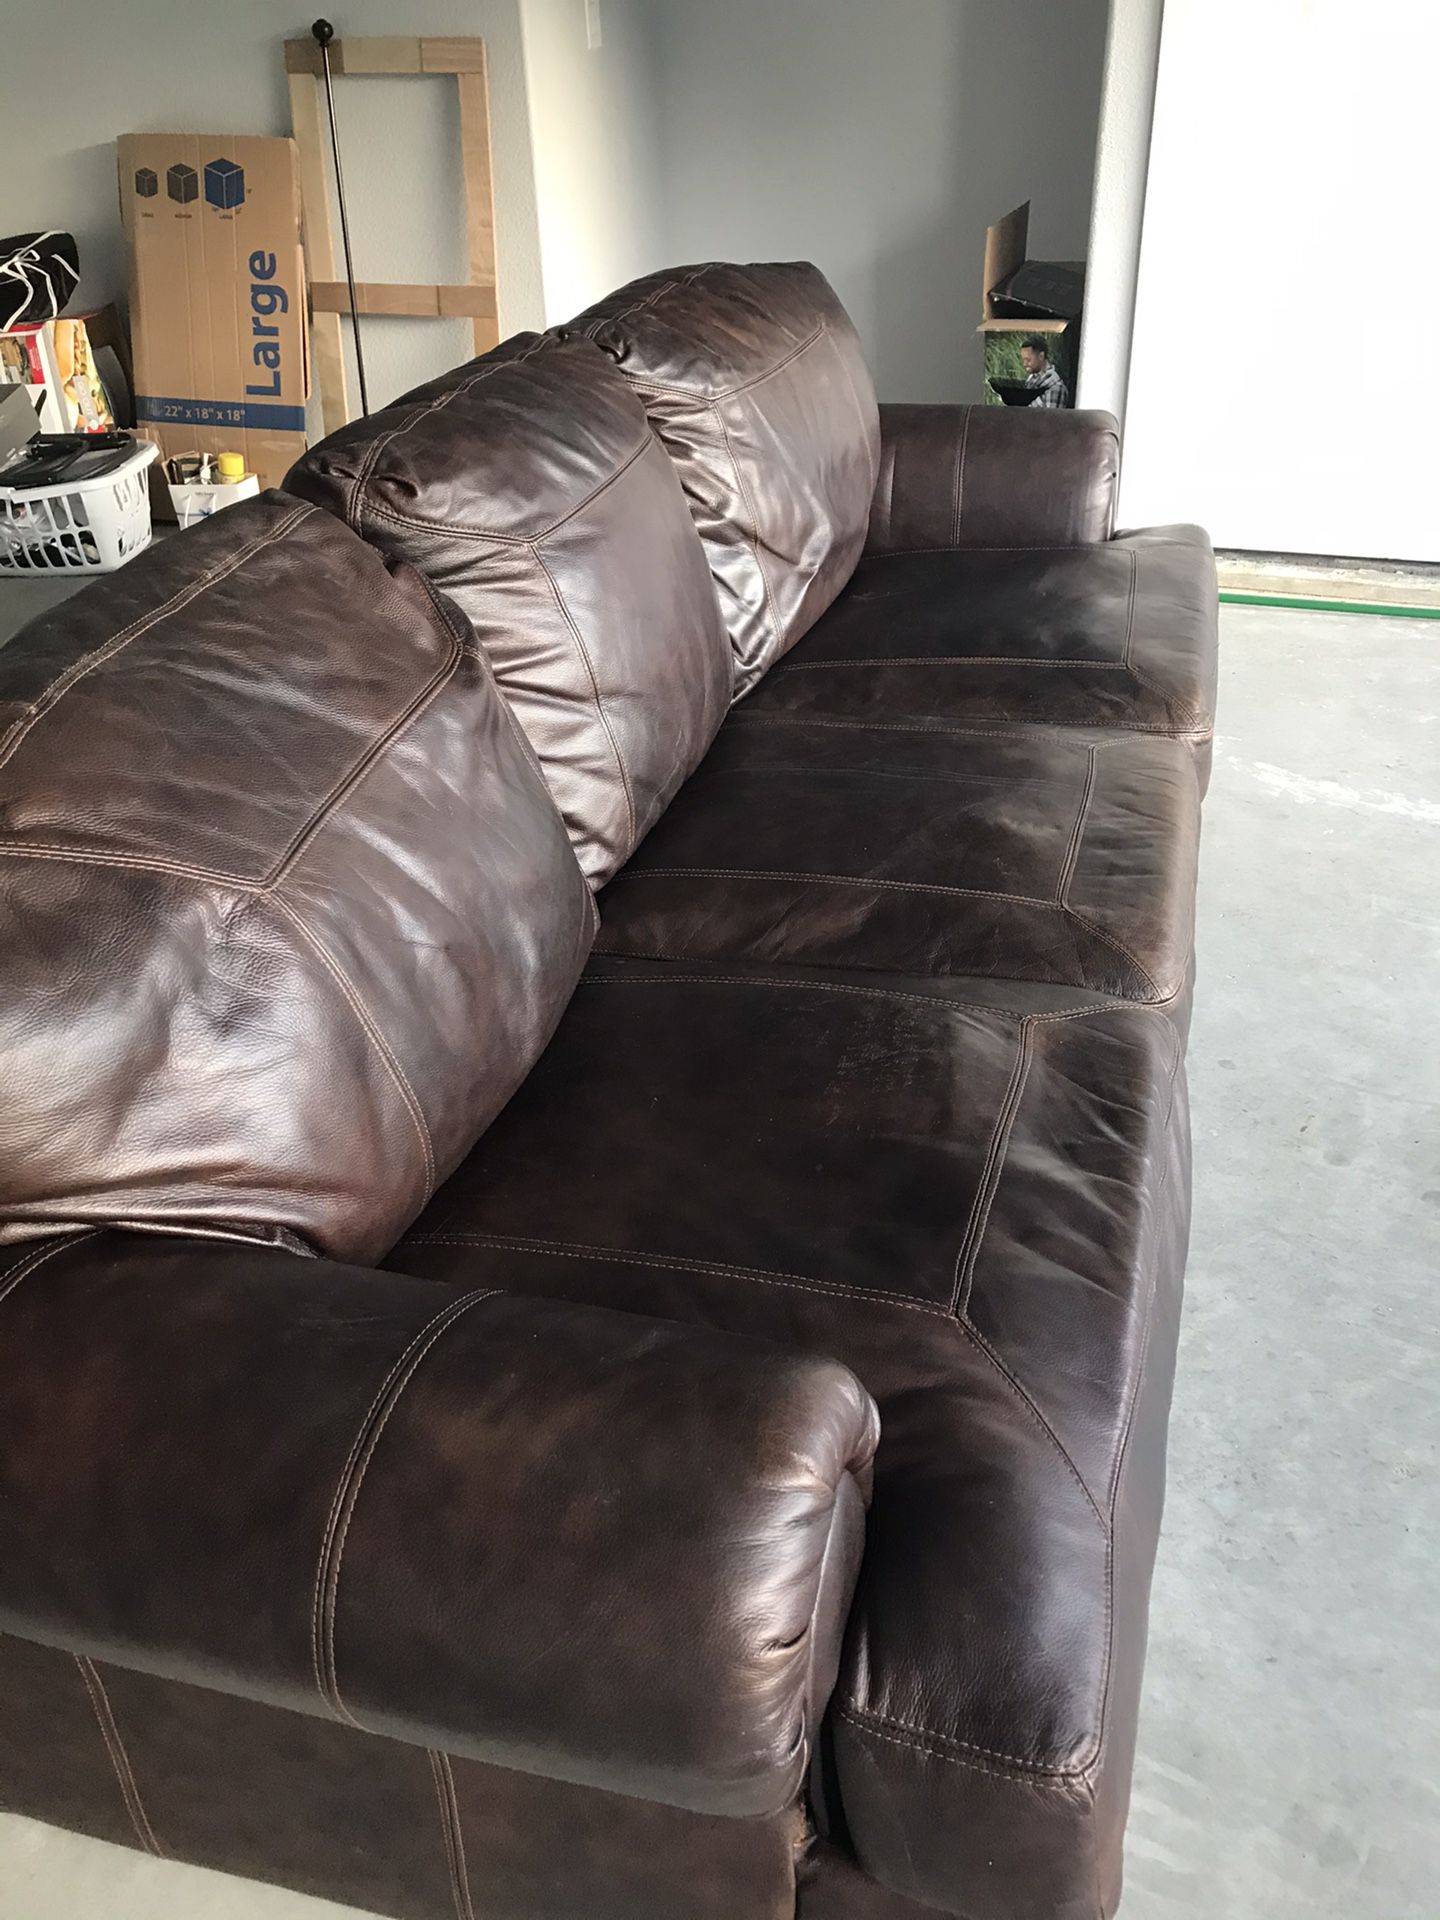 Brown leather couch from Ashley’s furniture $250